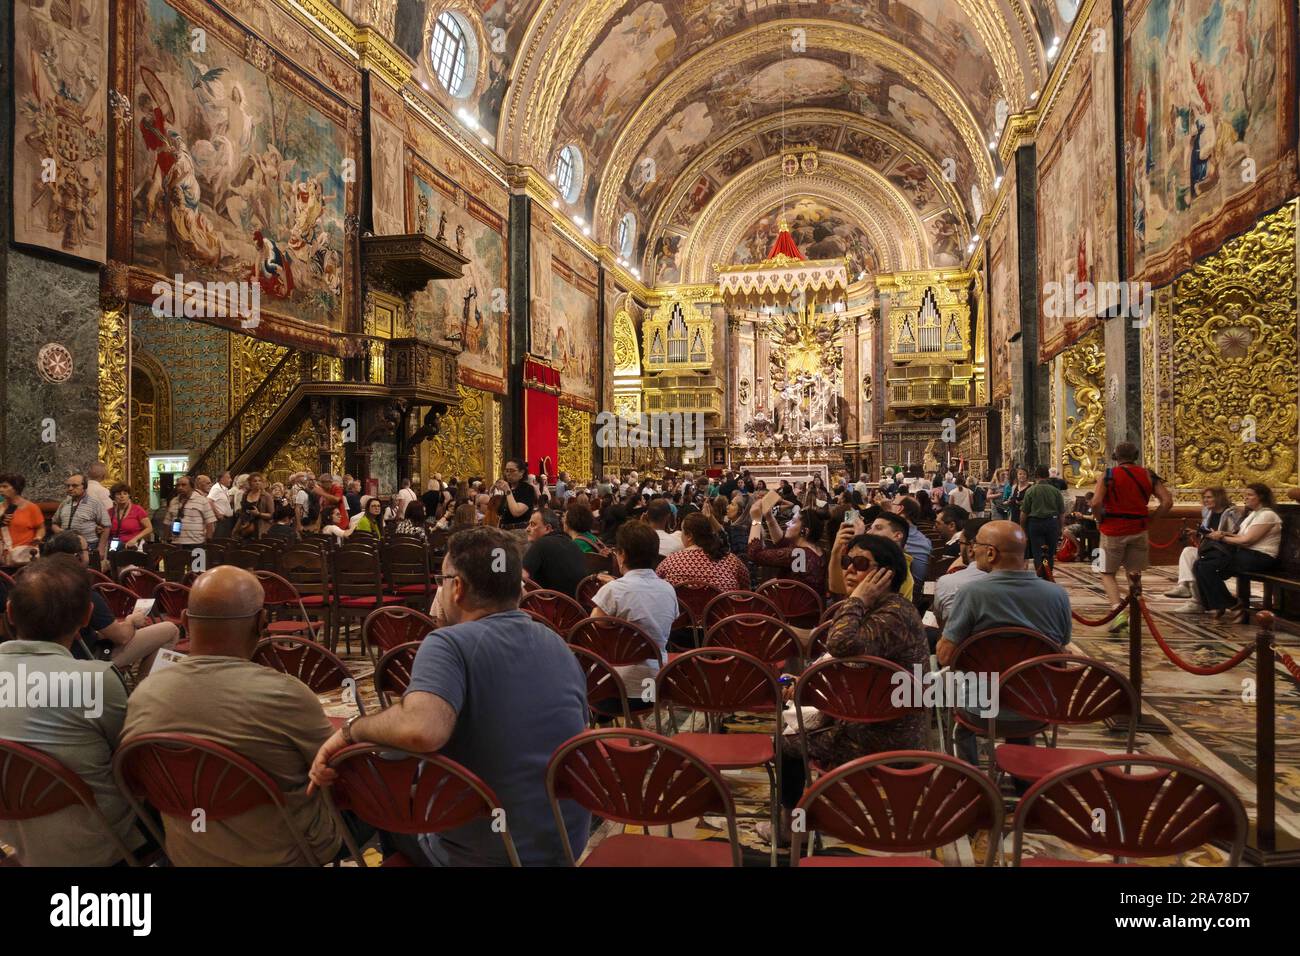 tourists crowds the interior main nave of St. John’s Co-Cathedral in Valletta, Malta Stock Photo